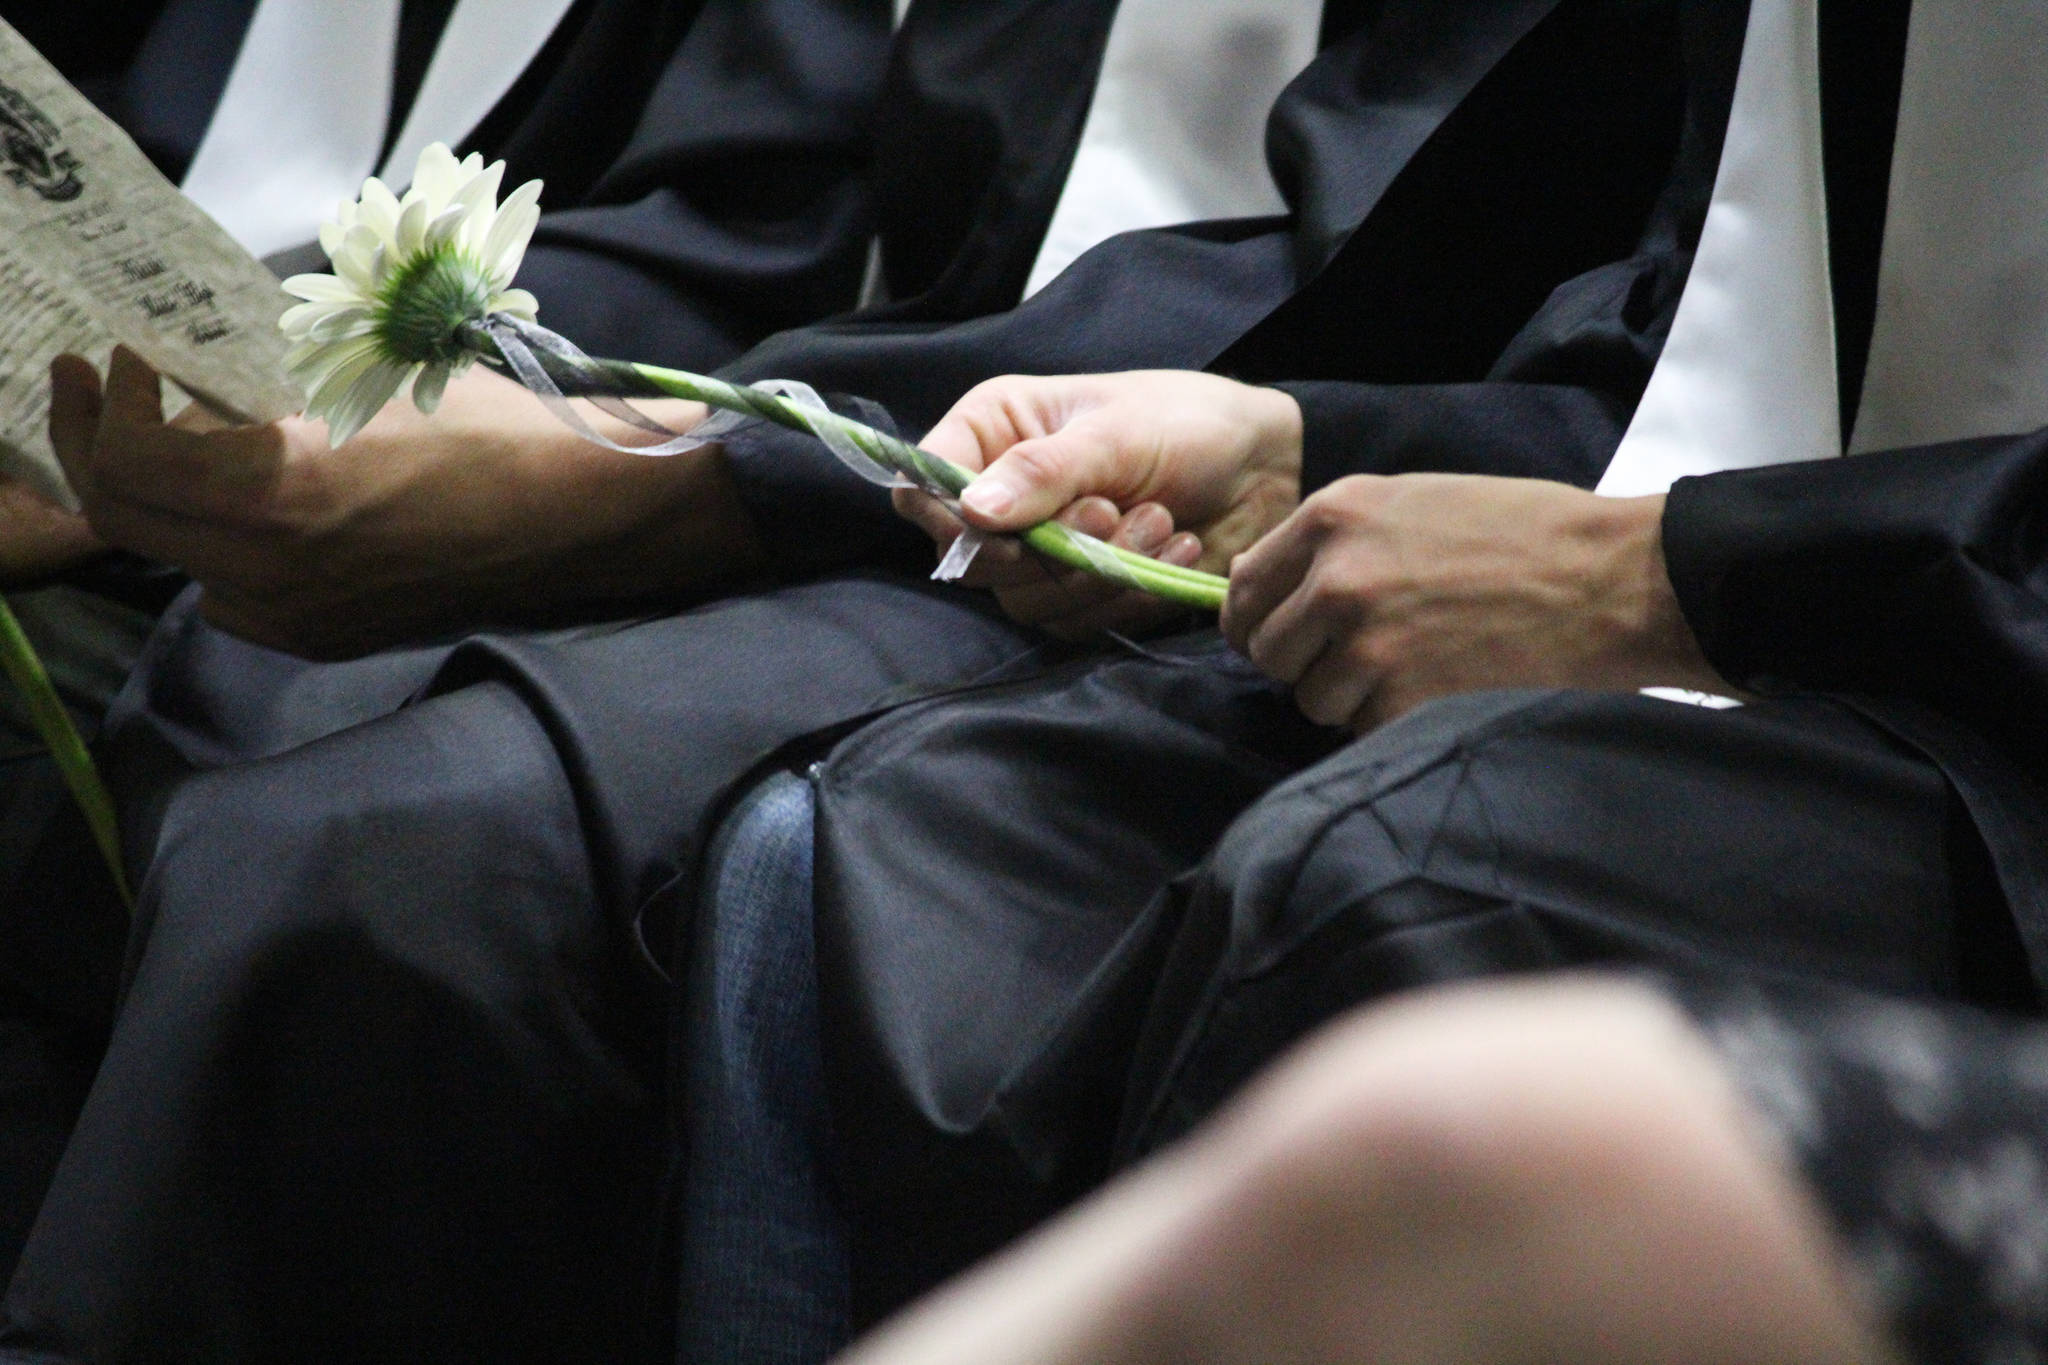 A graduate of Nikiski Middle-High School fidgets with his flower, which all the students carried, during the graduation ceremony Tuesday, May 23, 2017 at the school gymnasium in Nikiski, Alaska. (Megan Pacer/Peninsula Clarion)